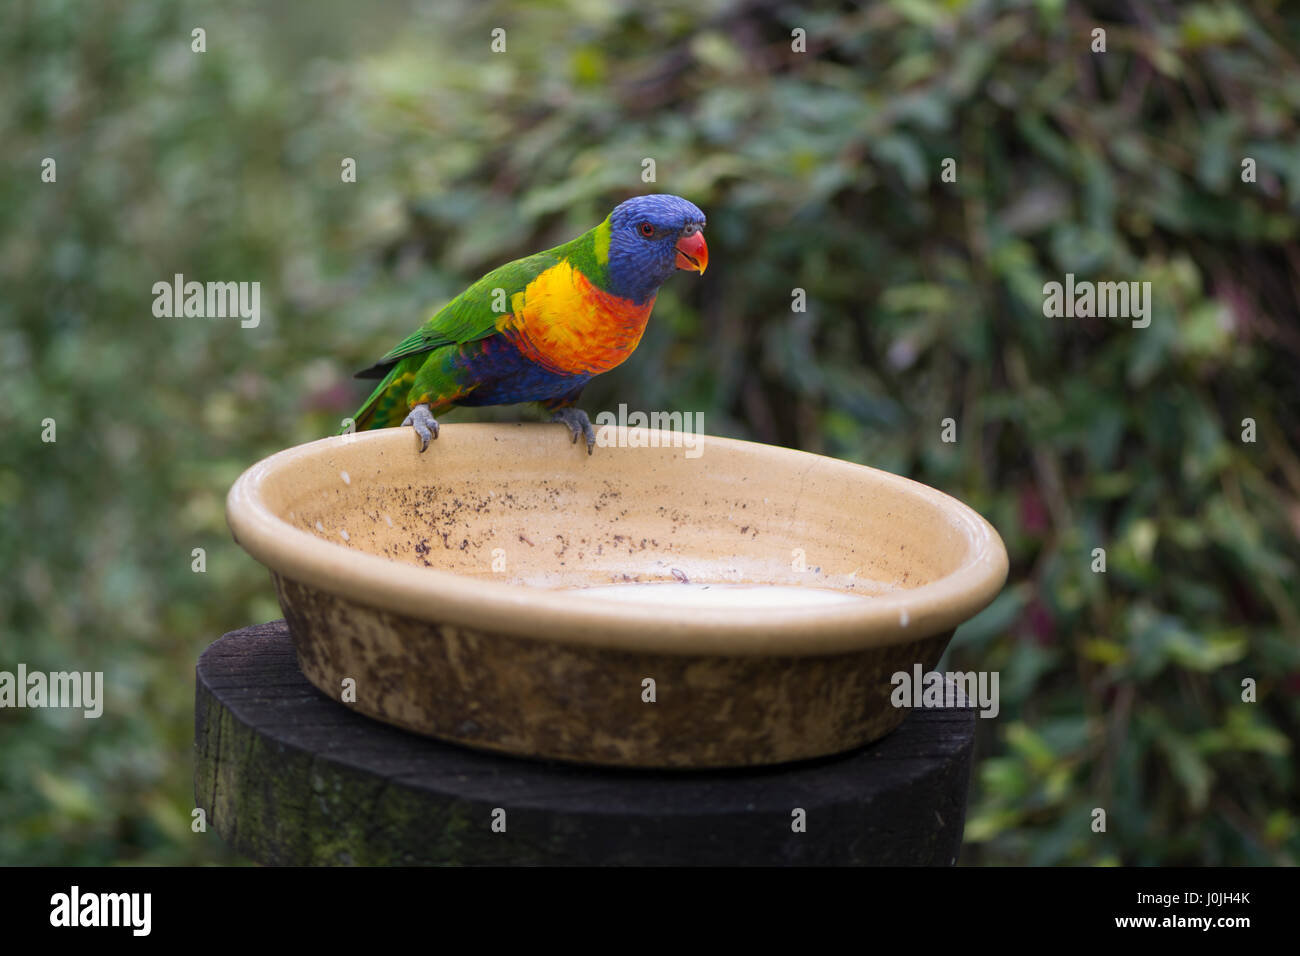 One wild rainbow lorikeets (Trichoglossus moluccanus) at a feeder, a native Australian parrot, taken in South Australia. Stock Photo